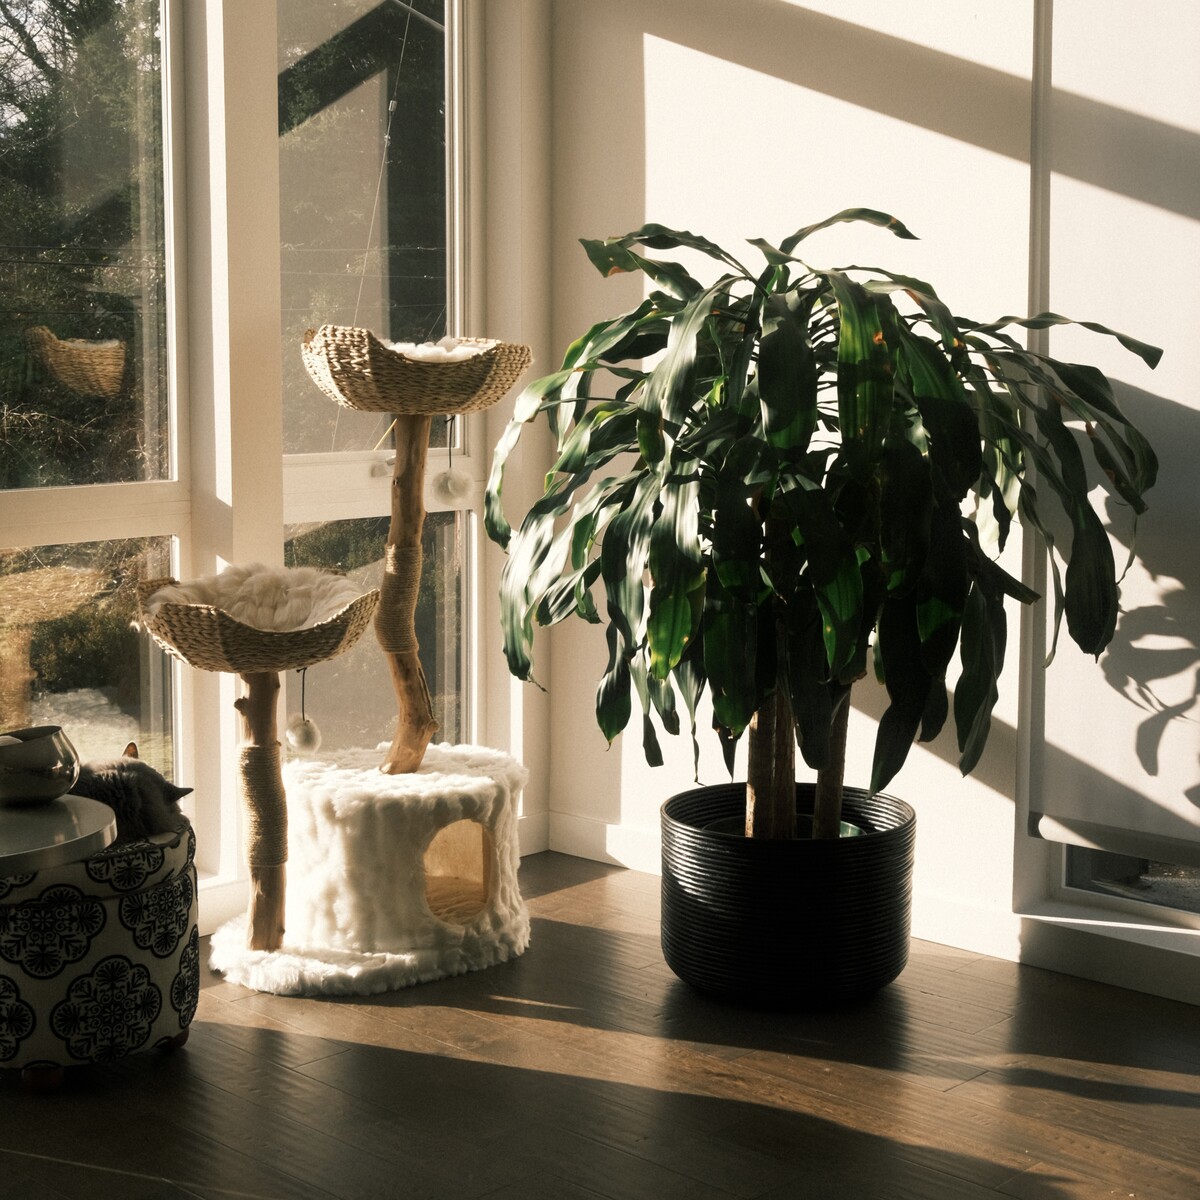 A rescued houseplant in the afternoon light.